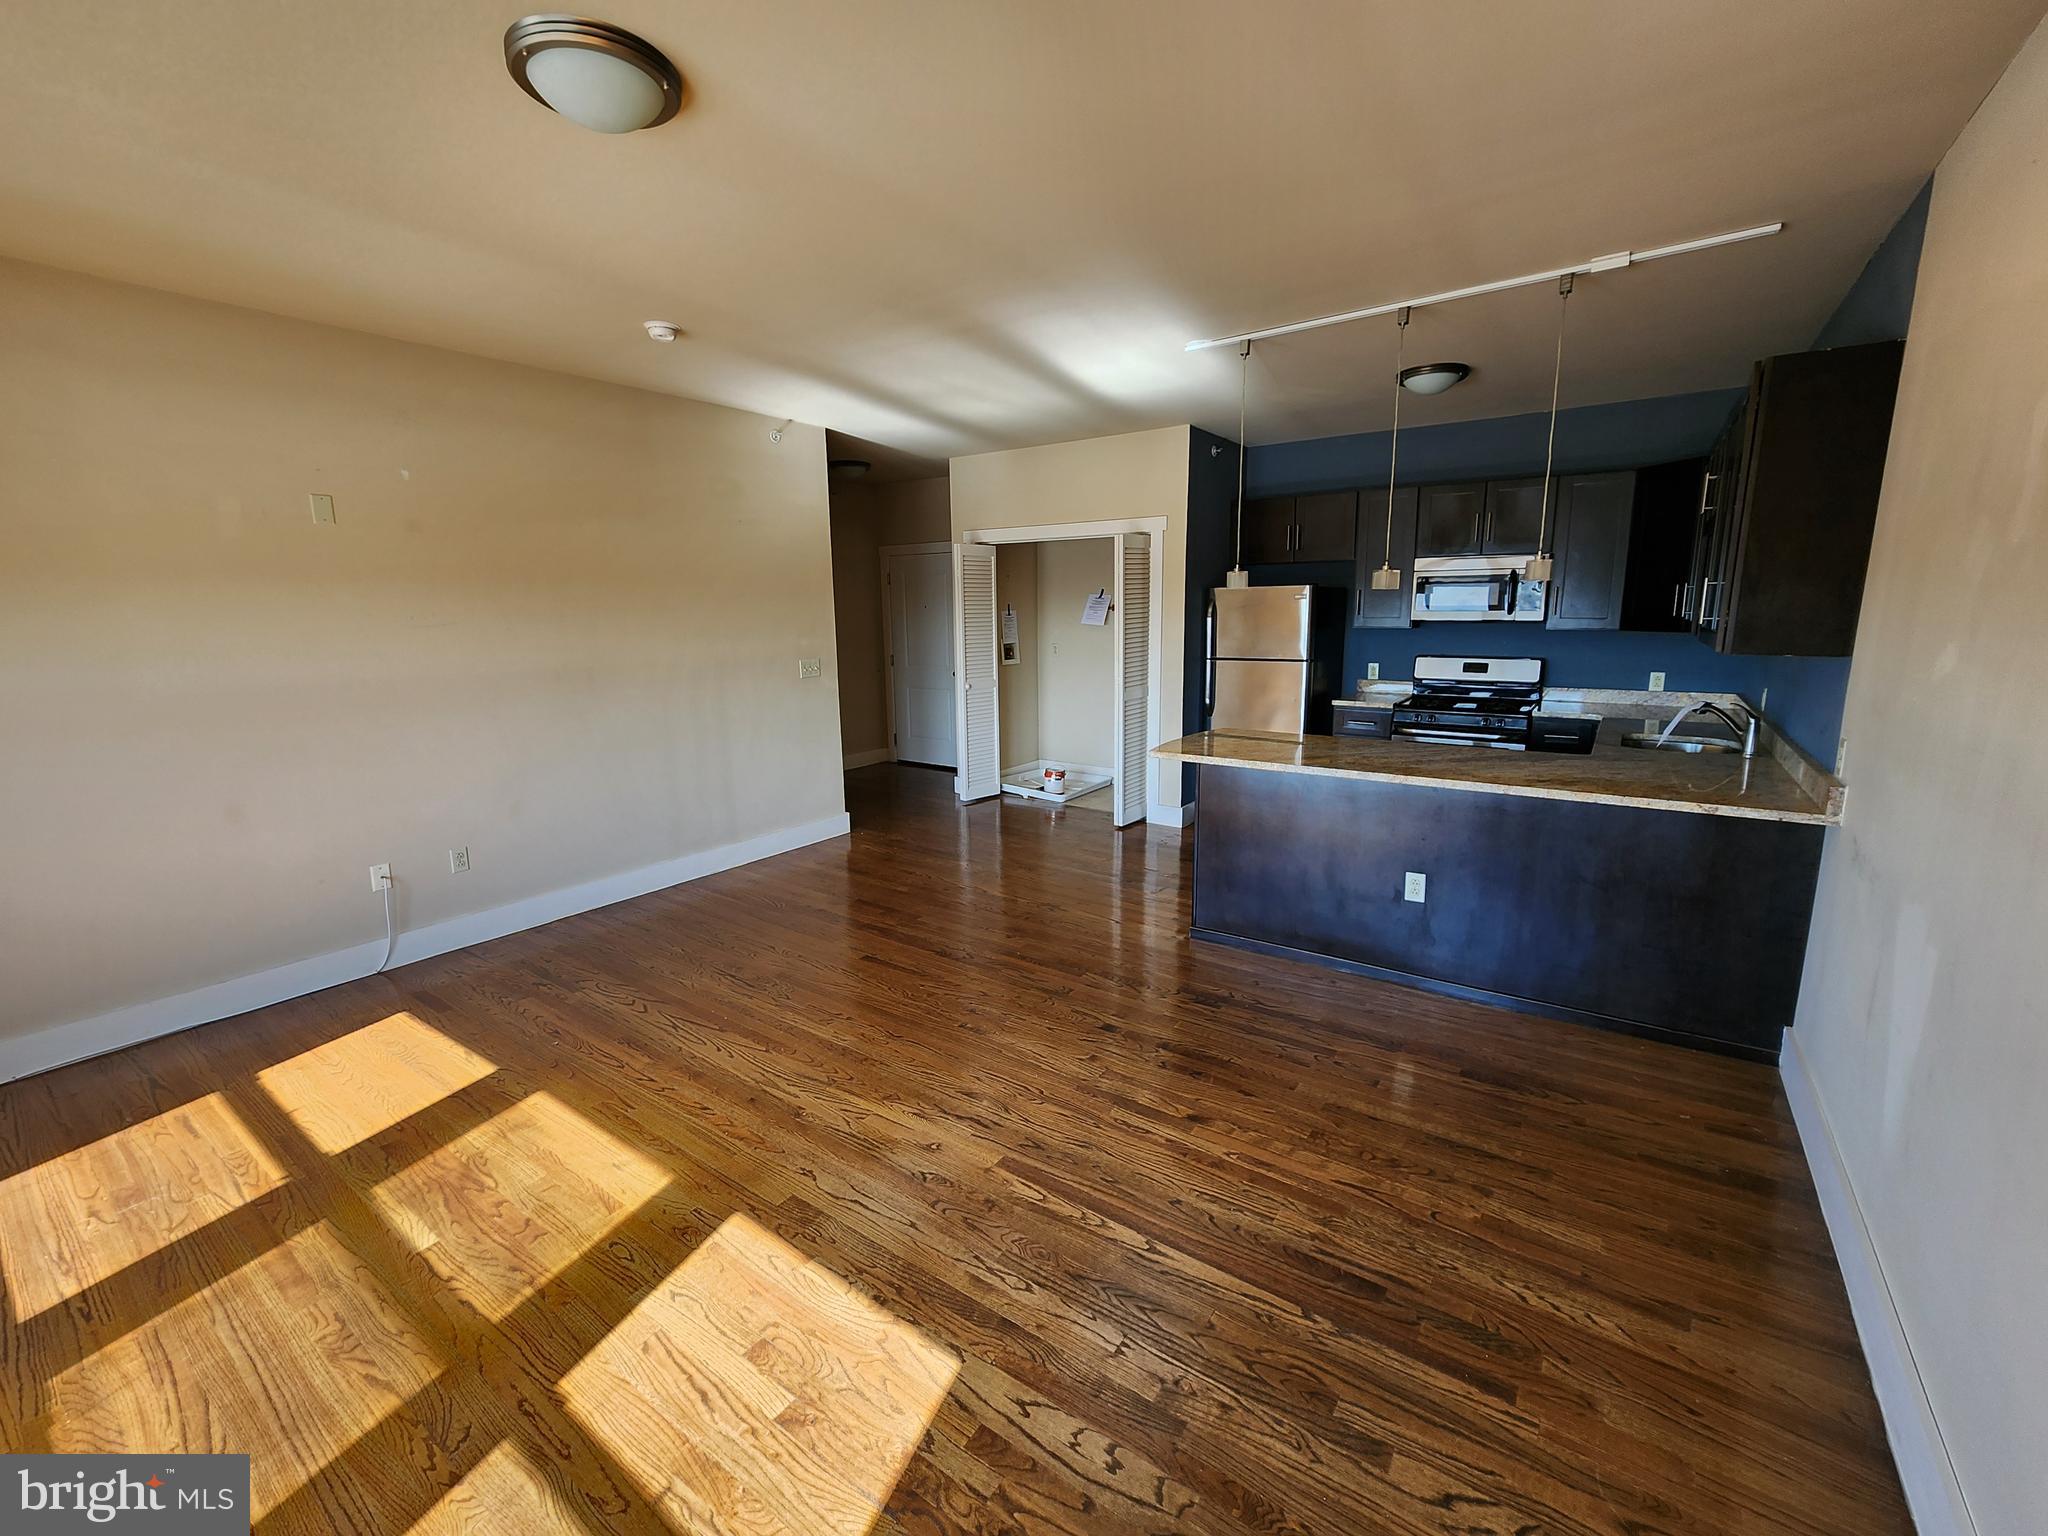 a living room with hard wood floors and a kitchen